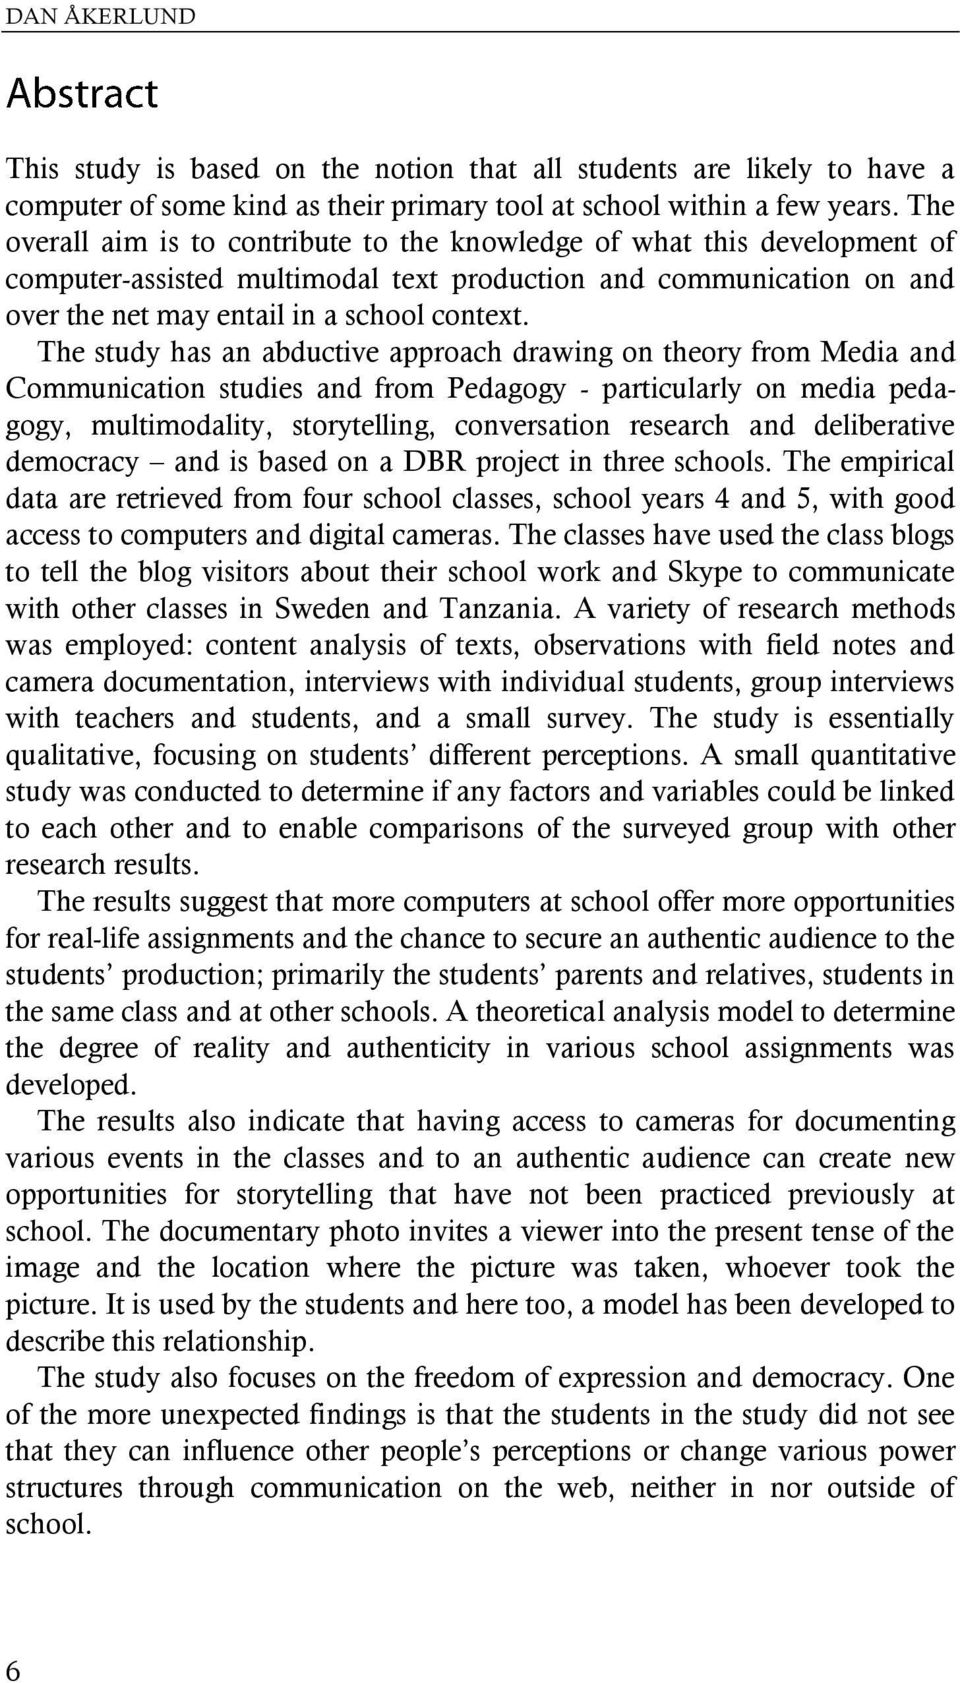 The study has an abductive approach drawing on theory from Media and Communication studies and from Pedagogy - particularly on media pedagogy, multimodality, storytelling, conversation research and